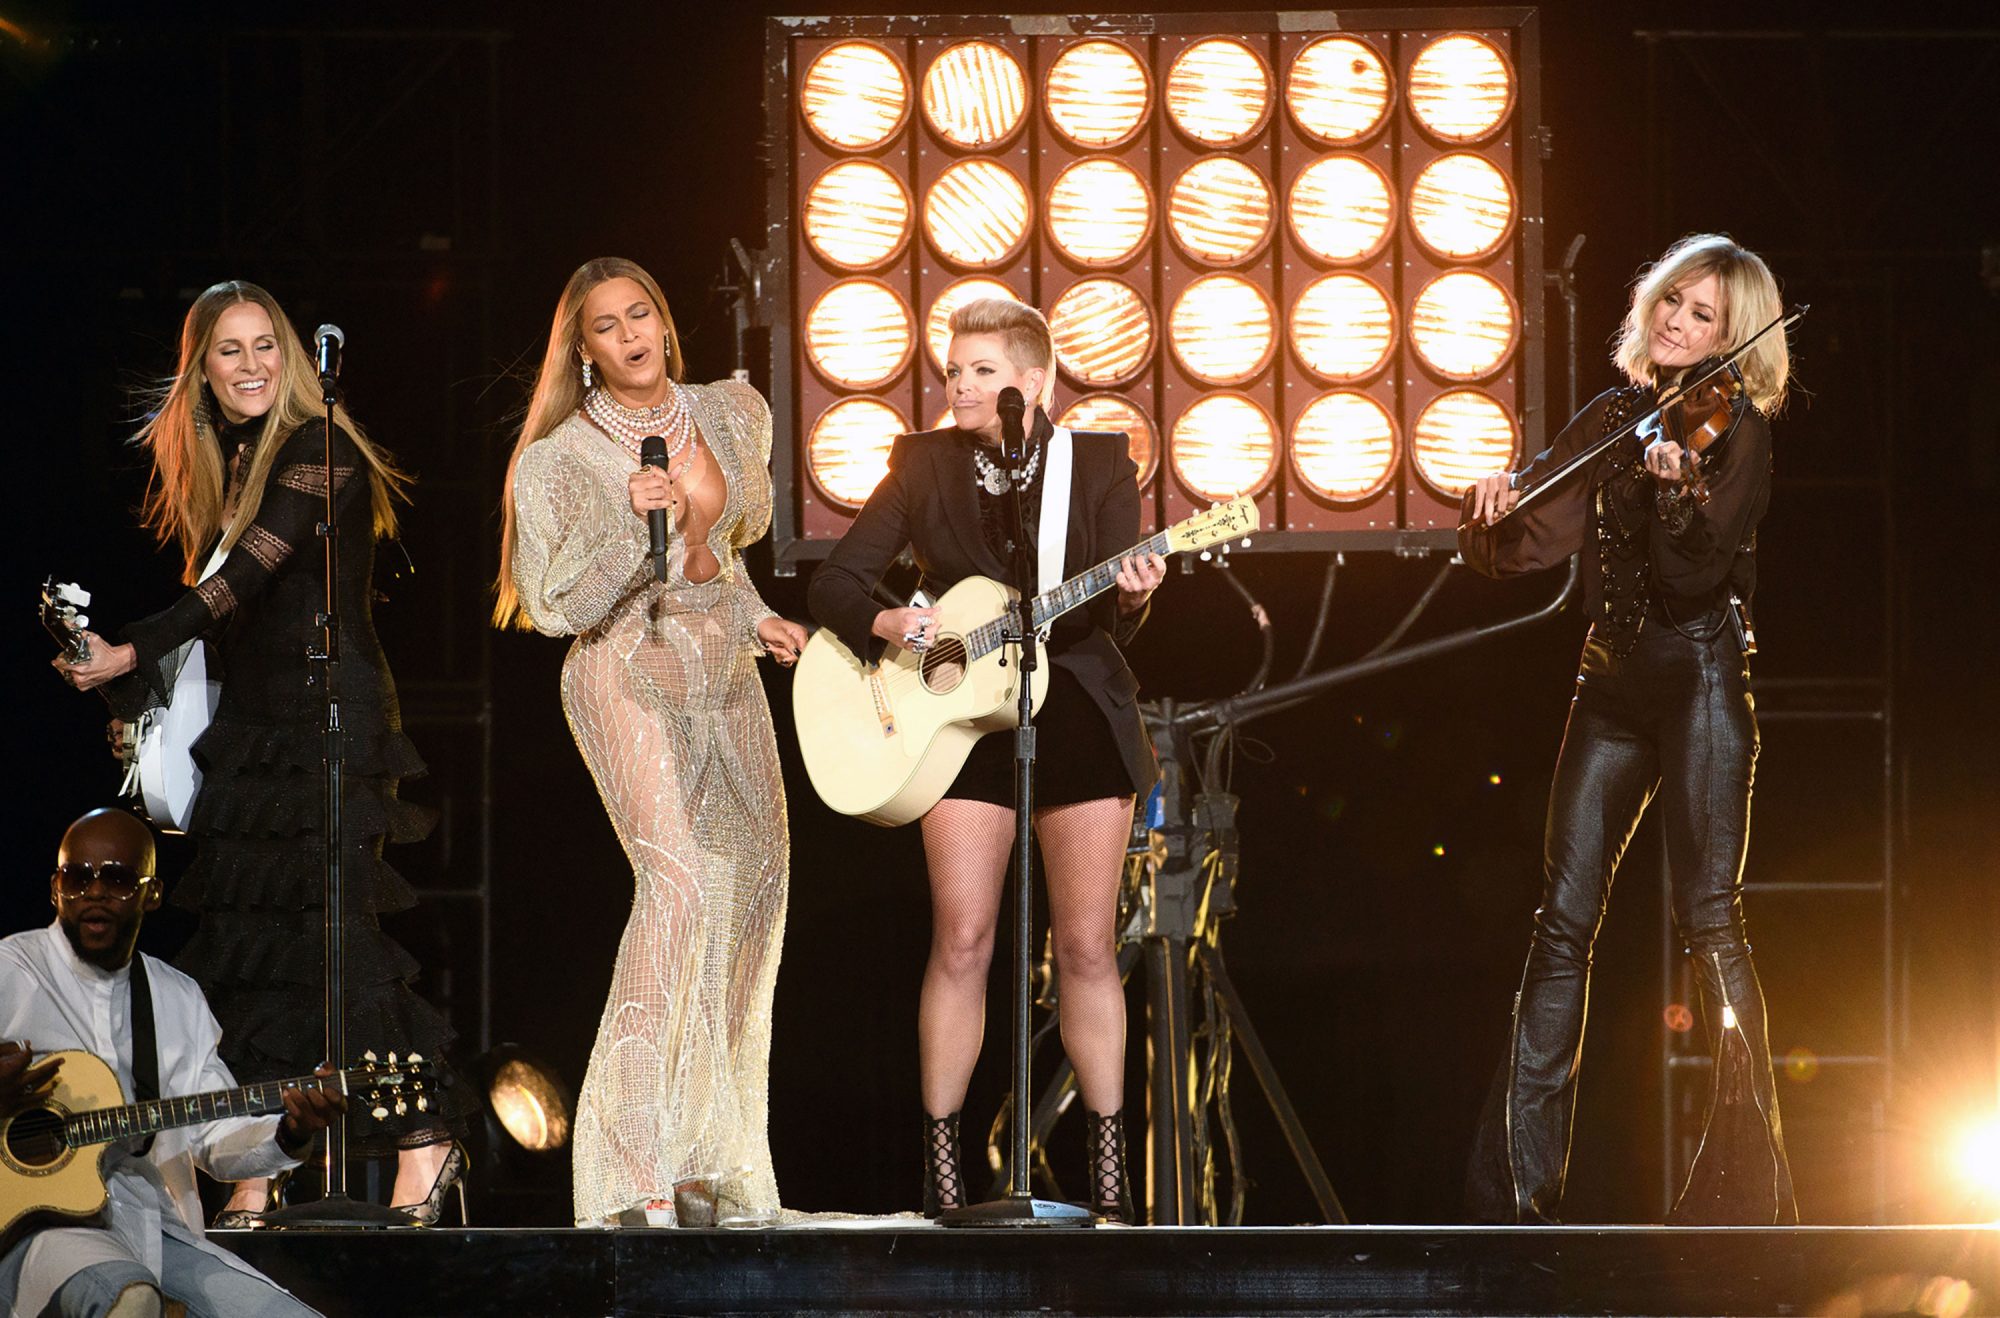 Beyoncé performed "Daddy Lessons" with the Dixie Chicks at the CMA